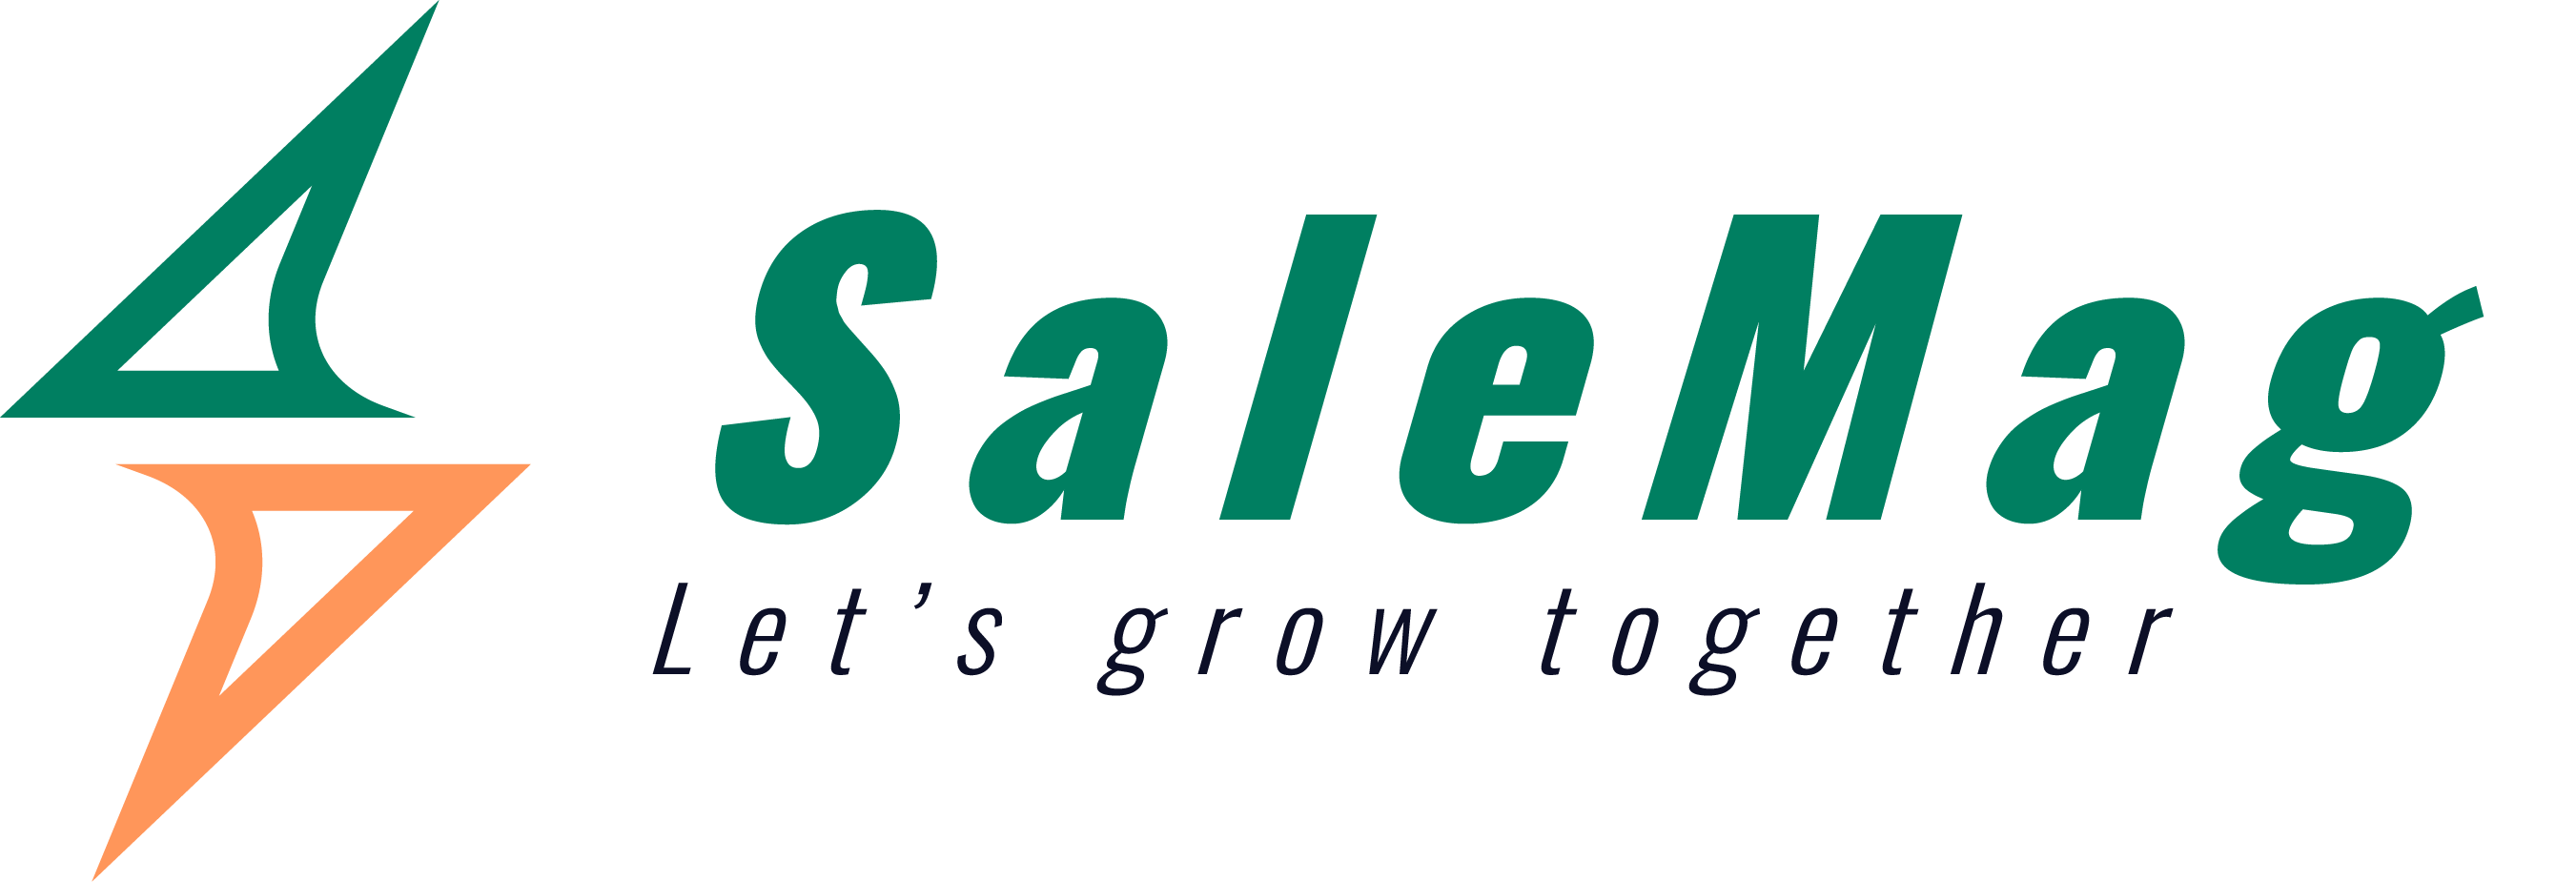 SaleMag Logo: Our digital marketing agency's iconic emblem, representing our core value of clear and simple communication. It's the visual anchor of our commitment to straightforward messaging and memorable branding.